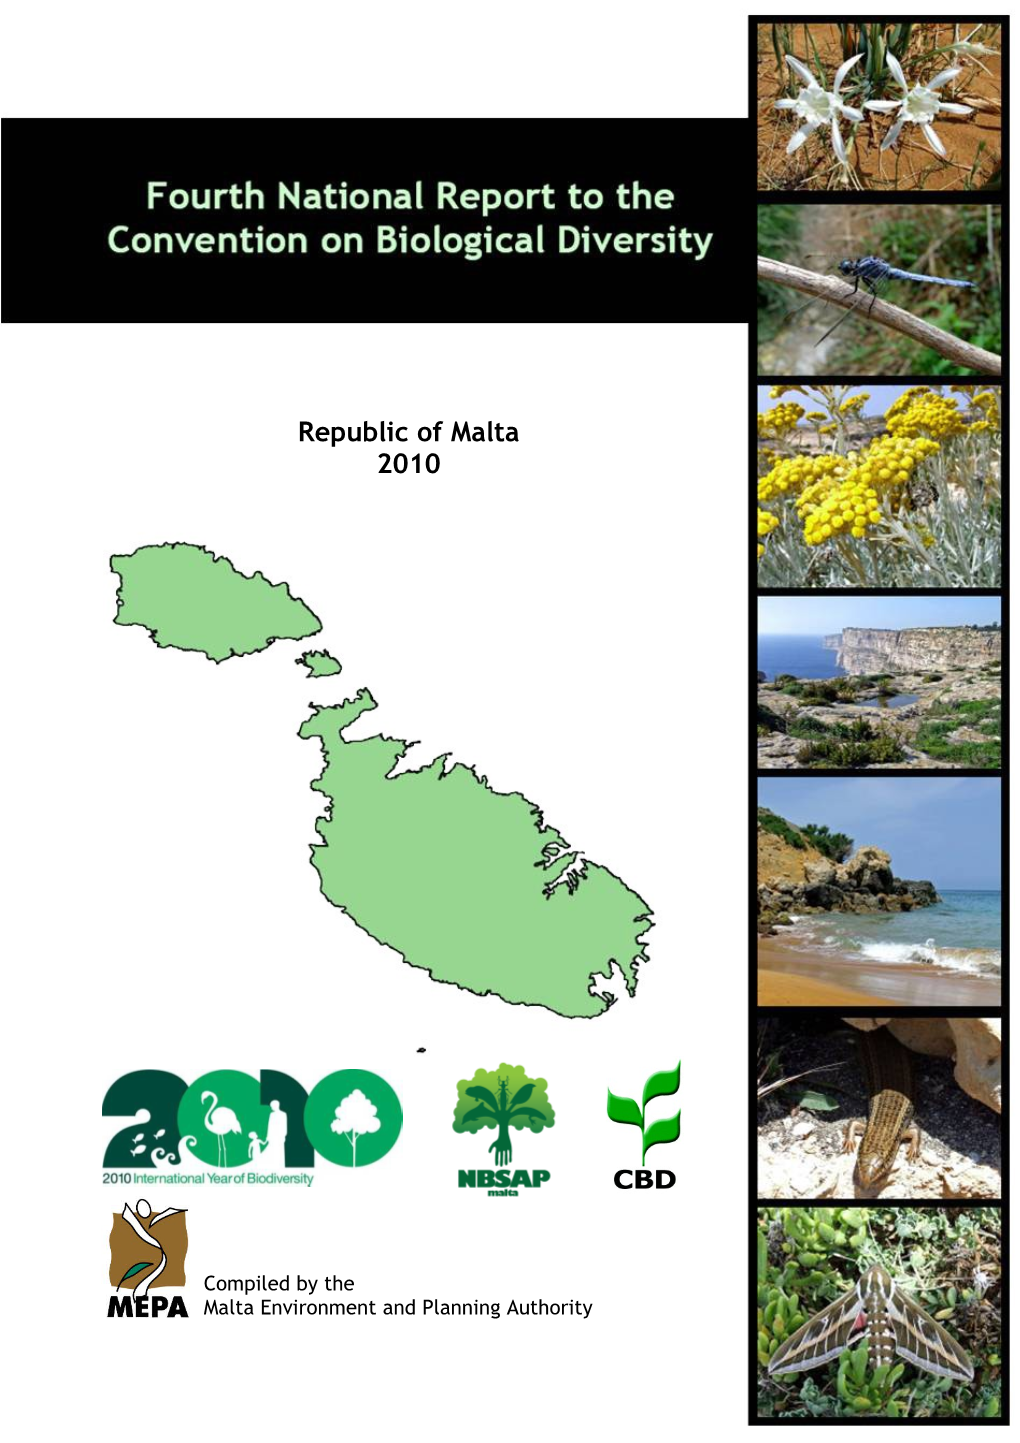 Fourth National Report on the Implementation of the Convention on Biological Diversity